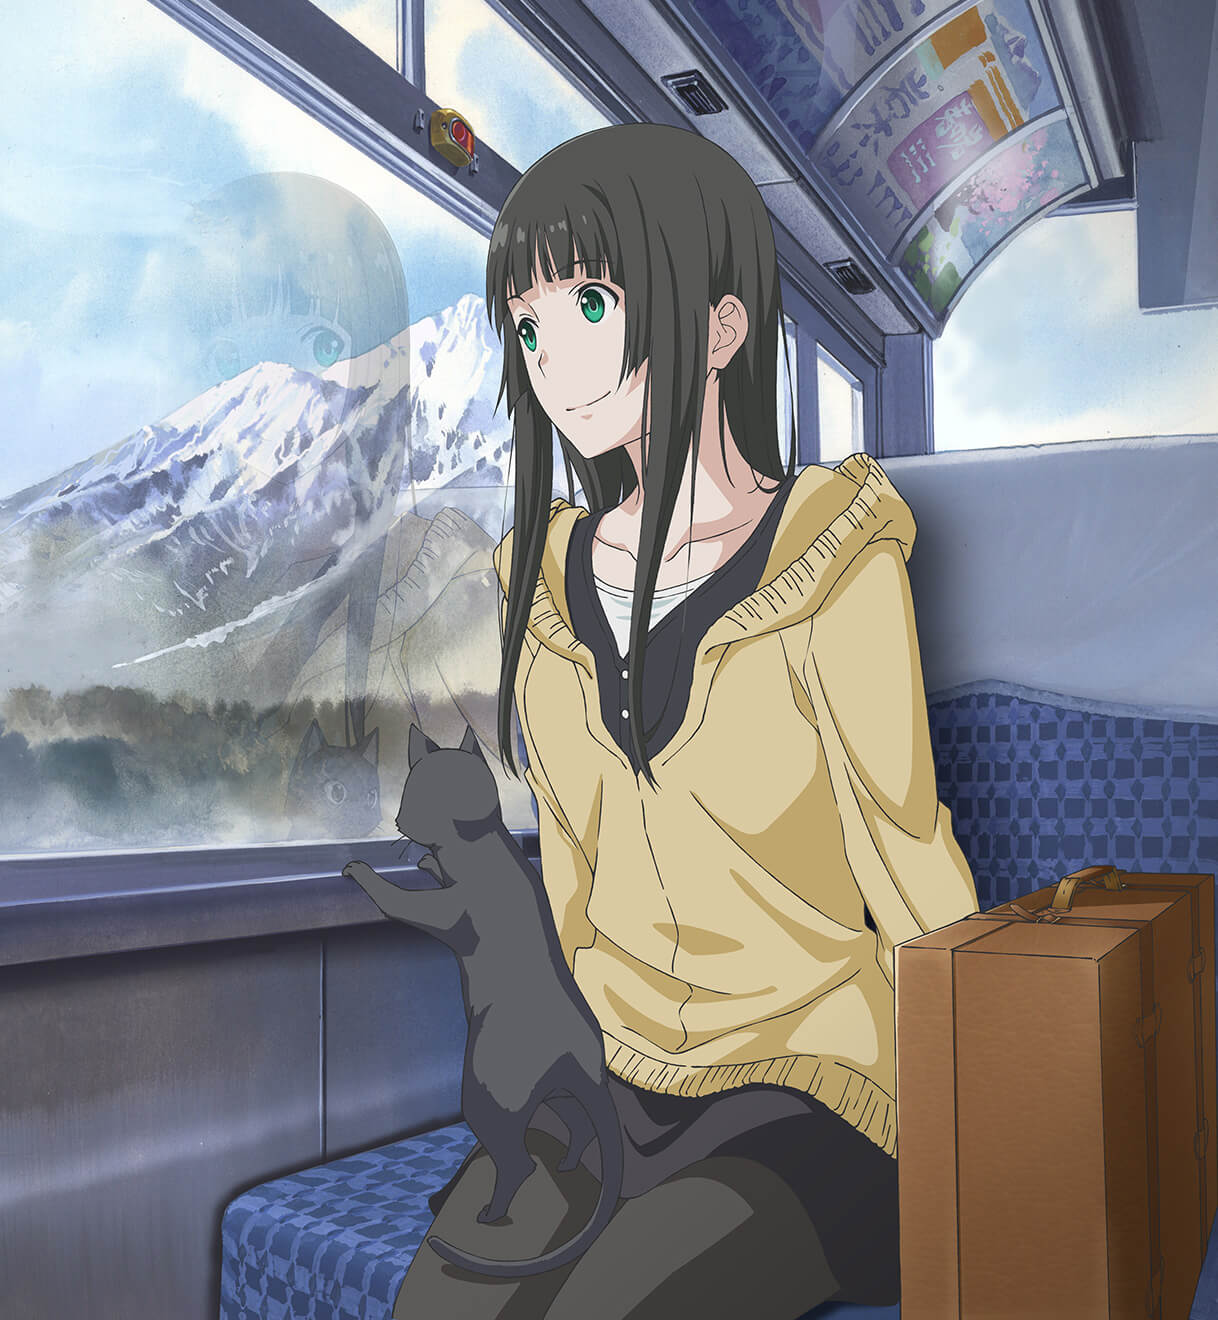 New Visual Revealed for J.C. Staff's Flying Witch TV Anime